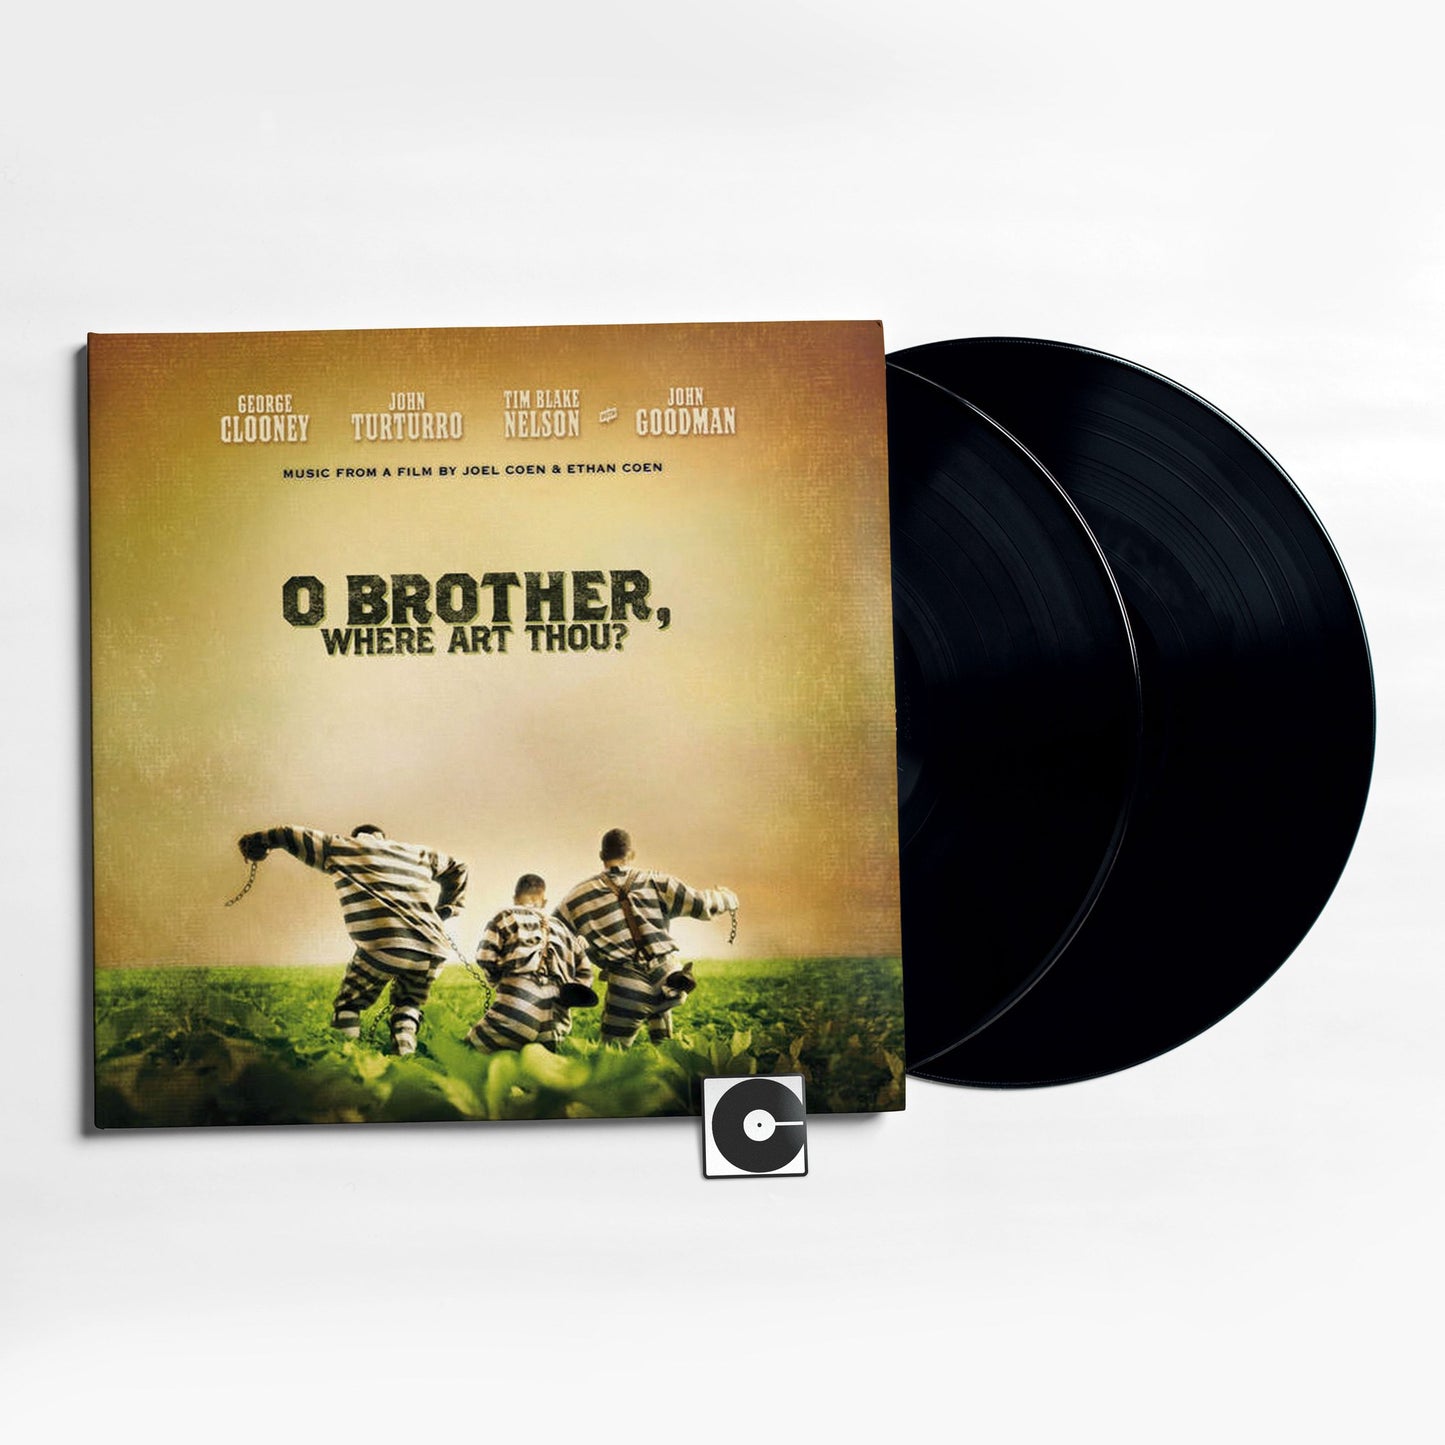 Various Artists - "O Brother, Where Art Thou? O.S.T."